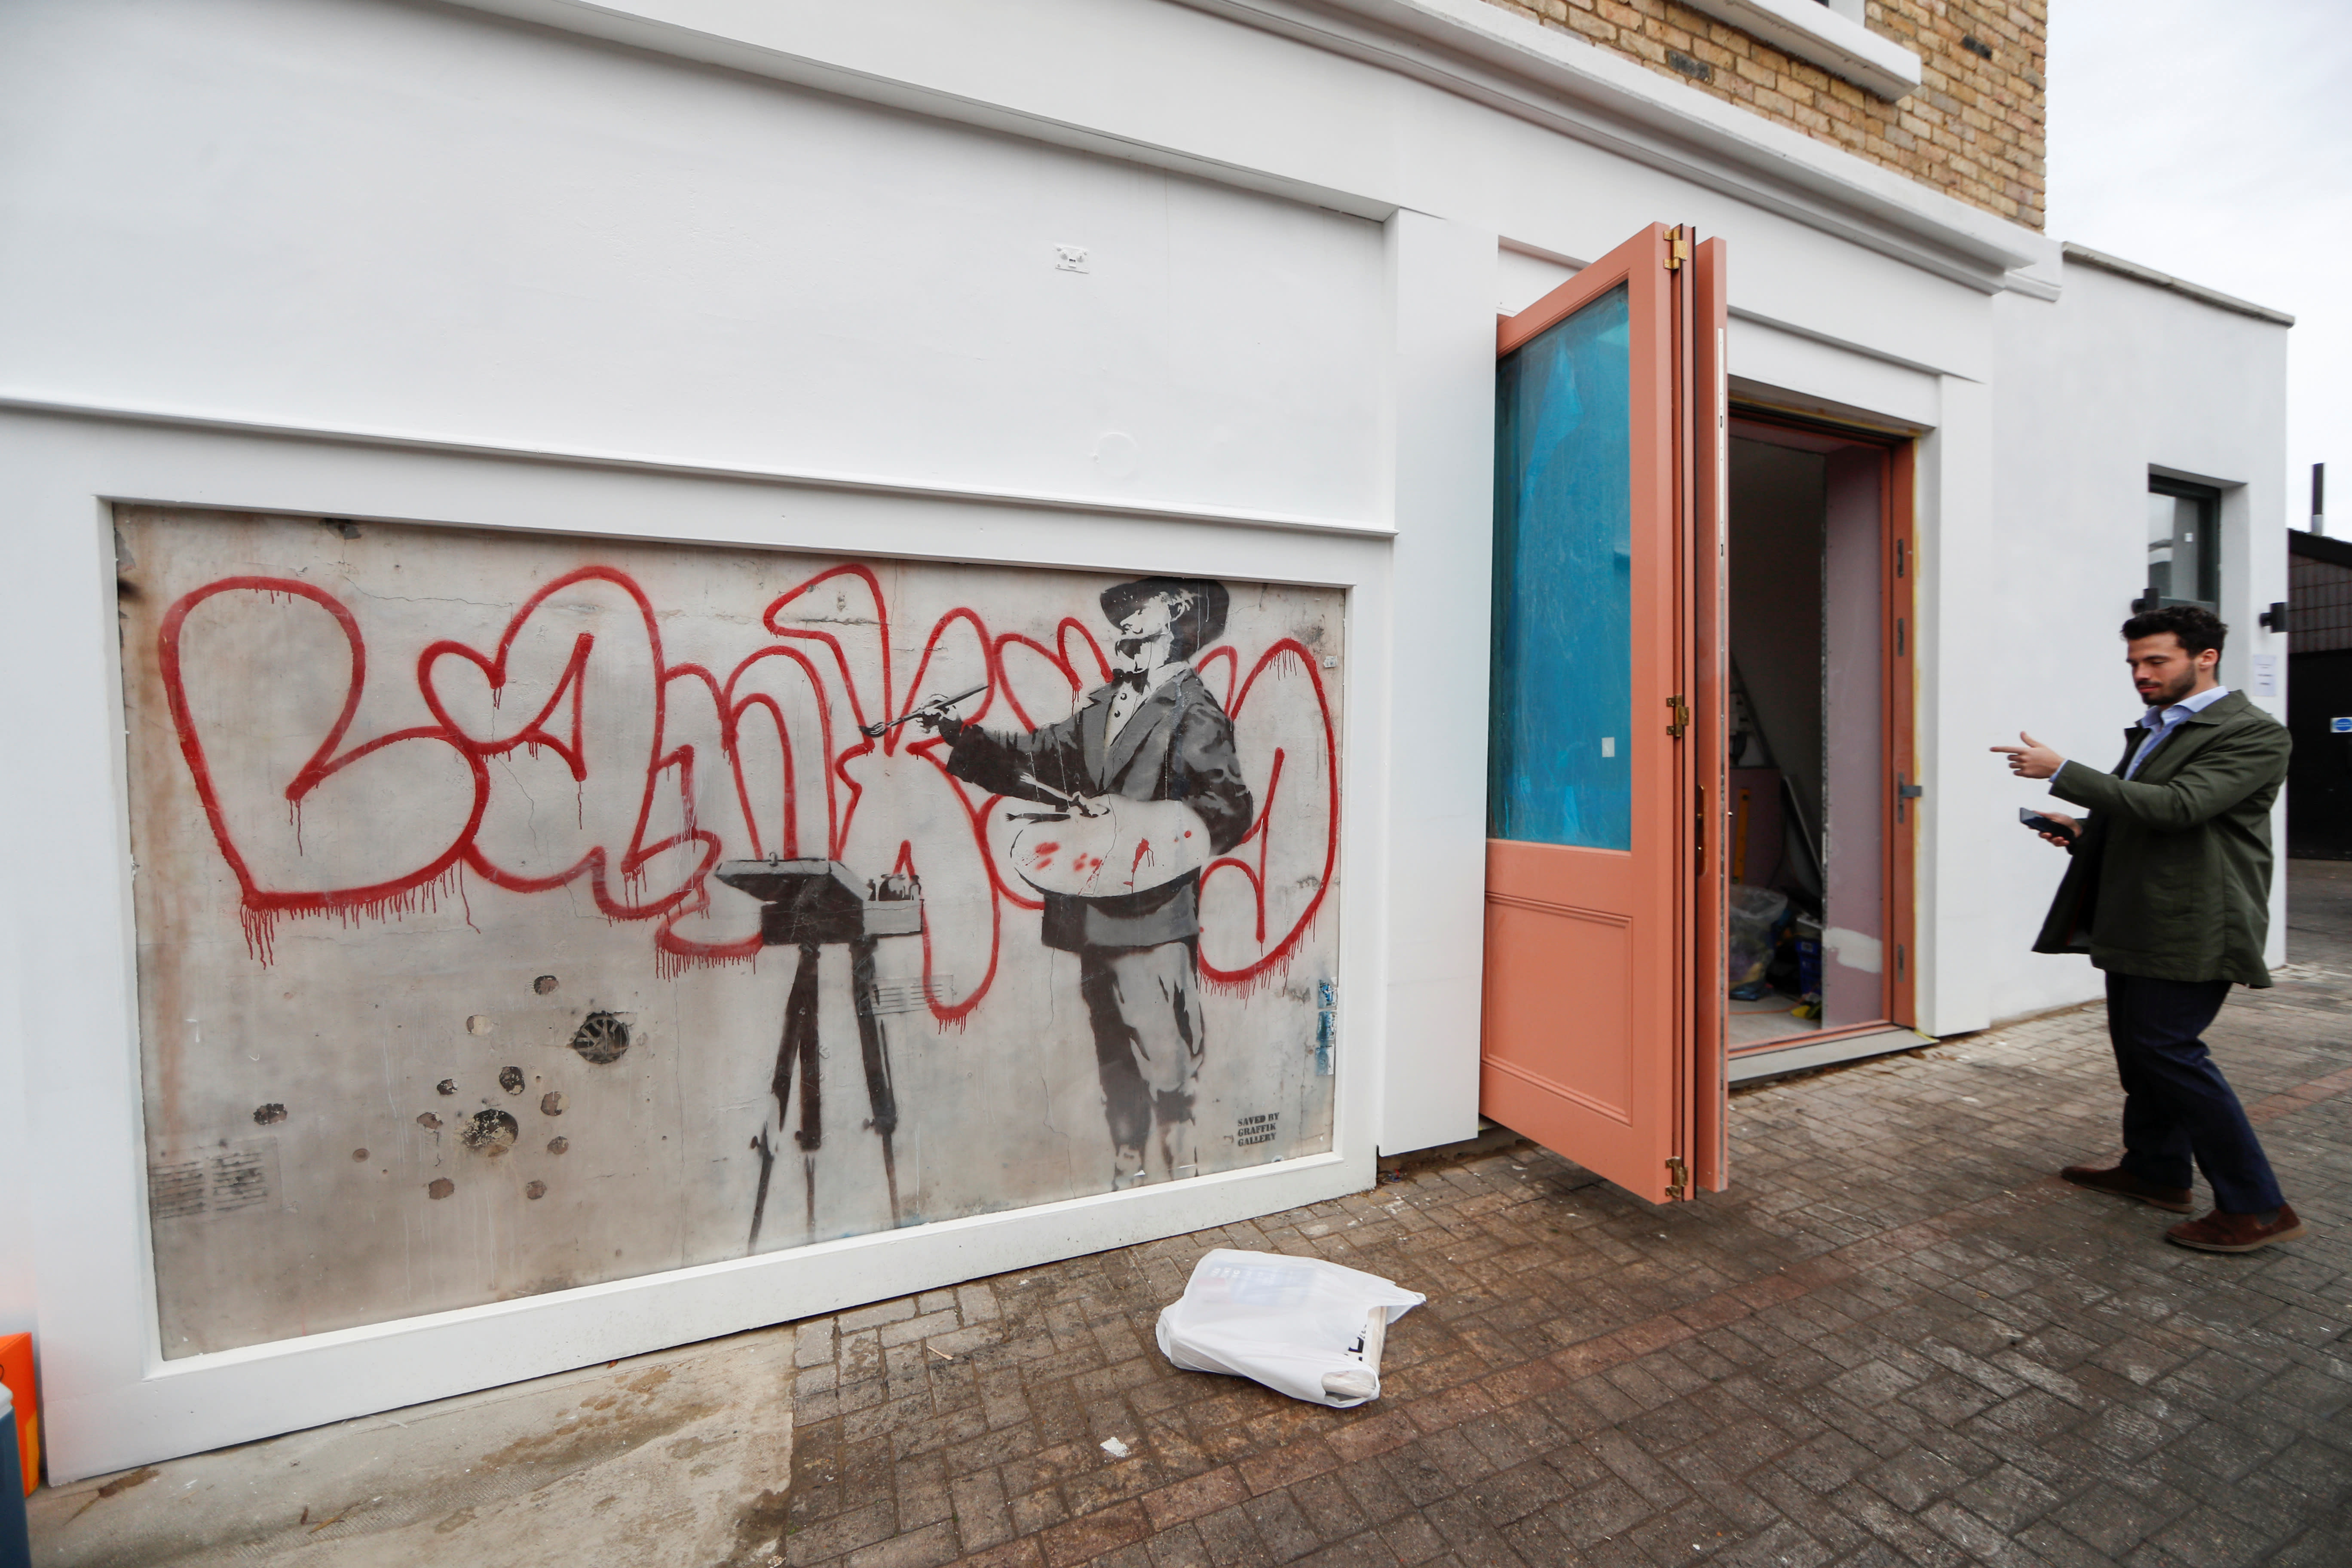 Banksy mural unveiled in London after being hidden by scaffolding